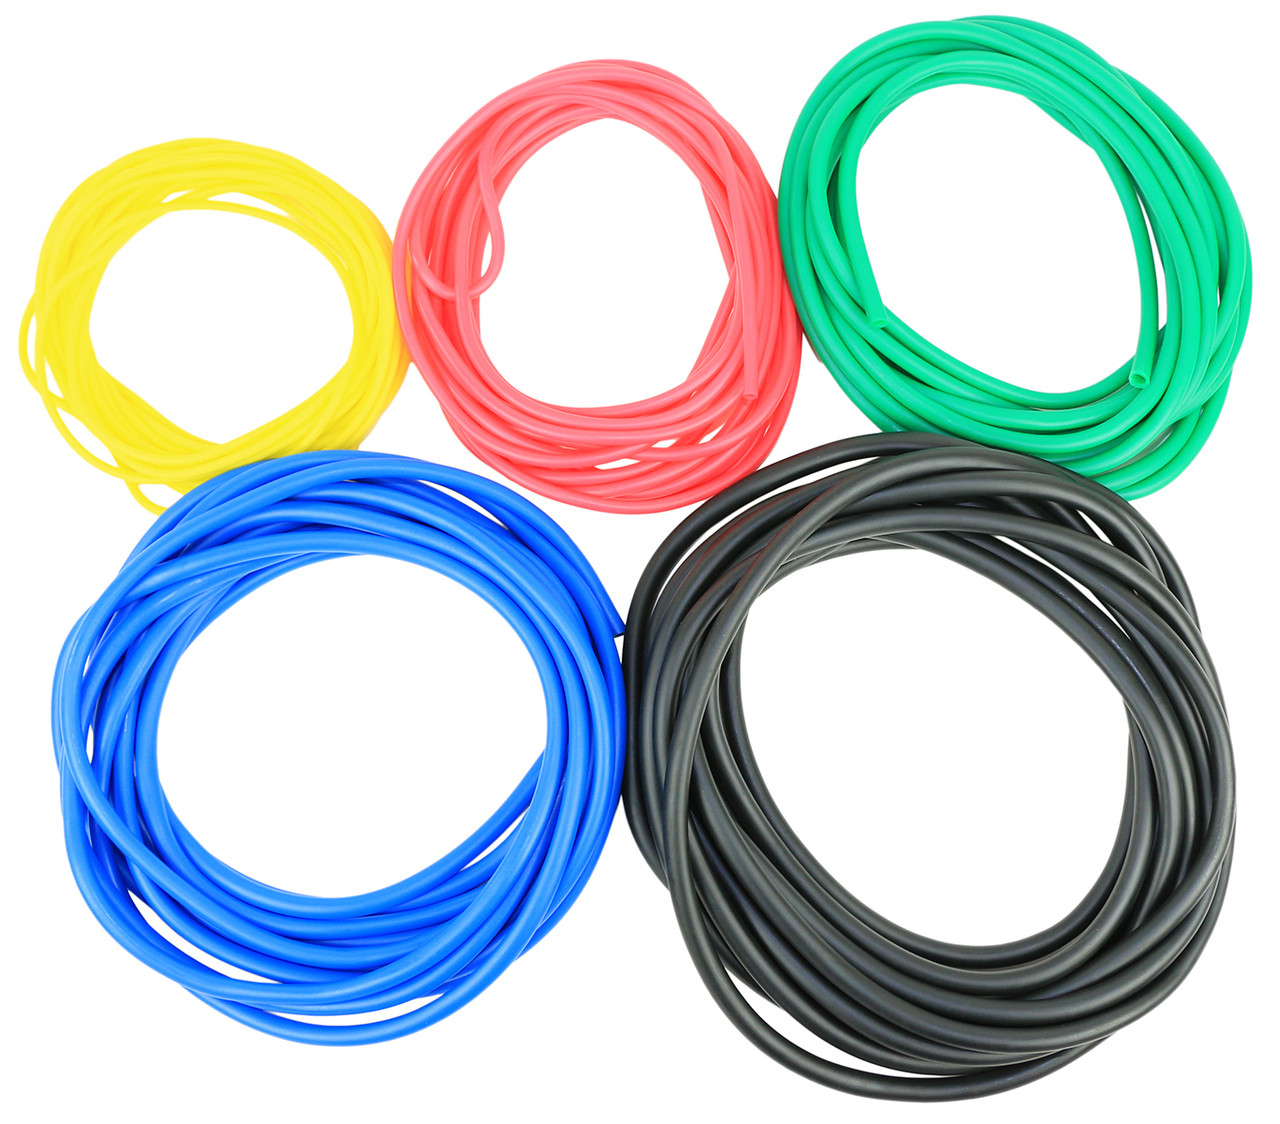 CanDo¨ Latex Free Exercise Tubing - 25' rolls, 5-piece set (1 each: yellow, red, green, blue, black)